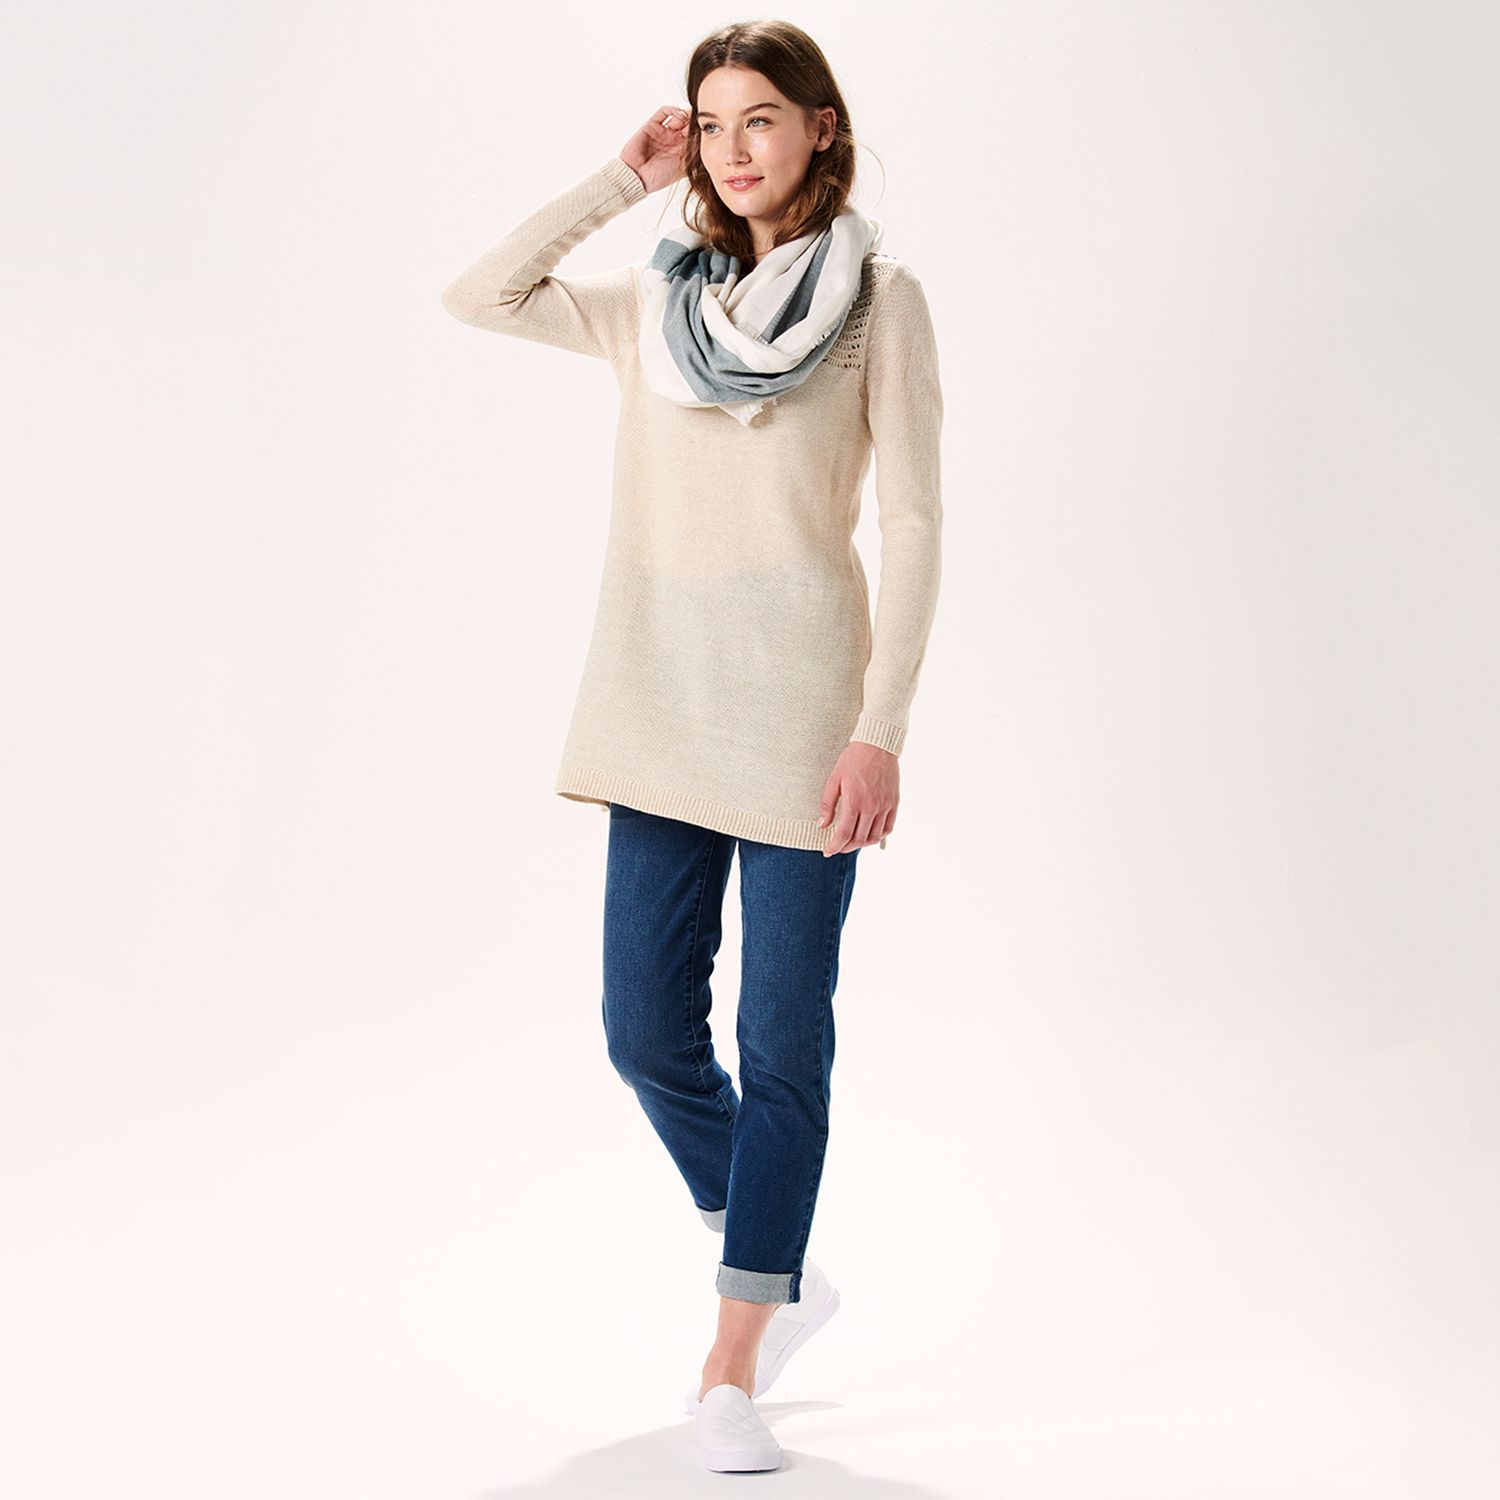 Stylish & Cozy Cold Weather Looks for the Whole Family - Kohl's Blog